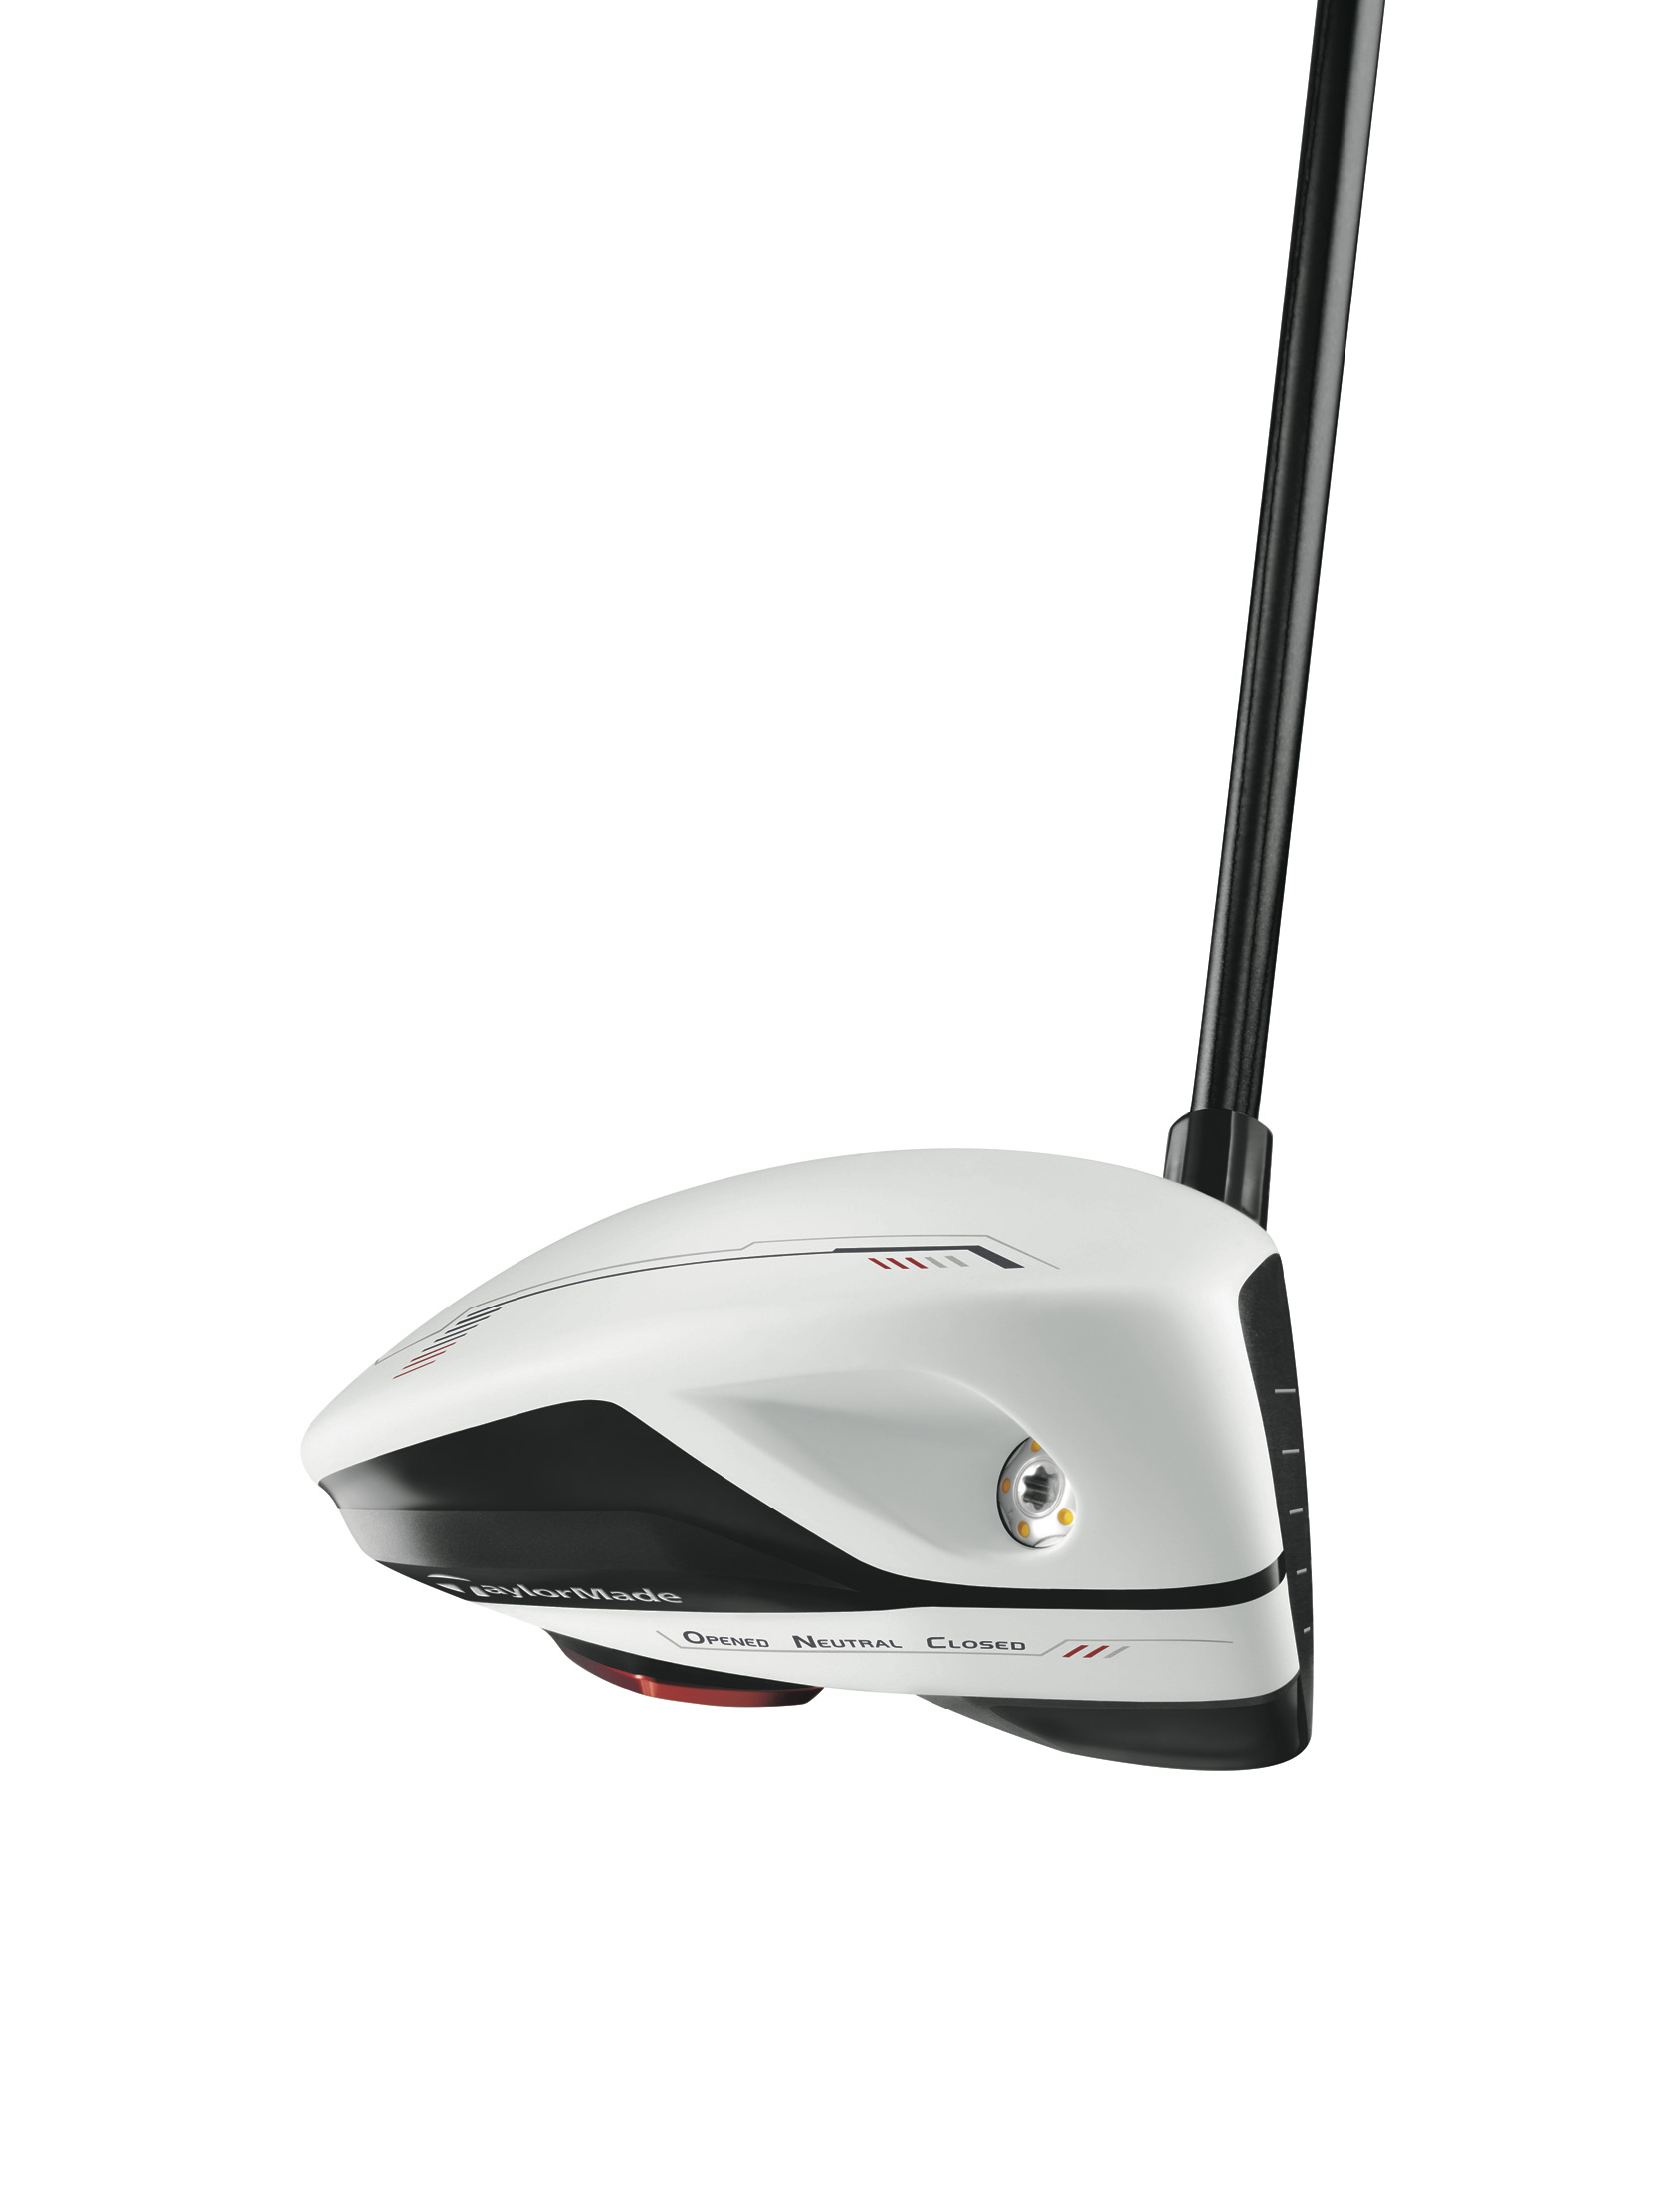 Taylormade R11s Used Driver